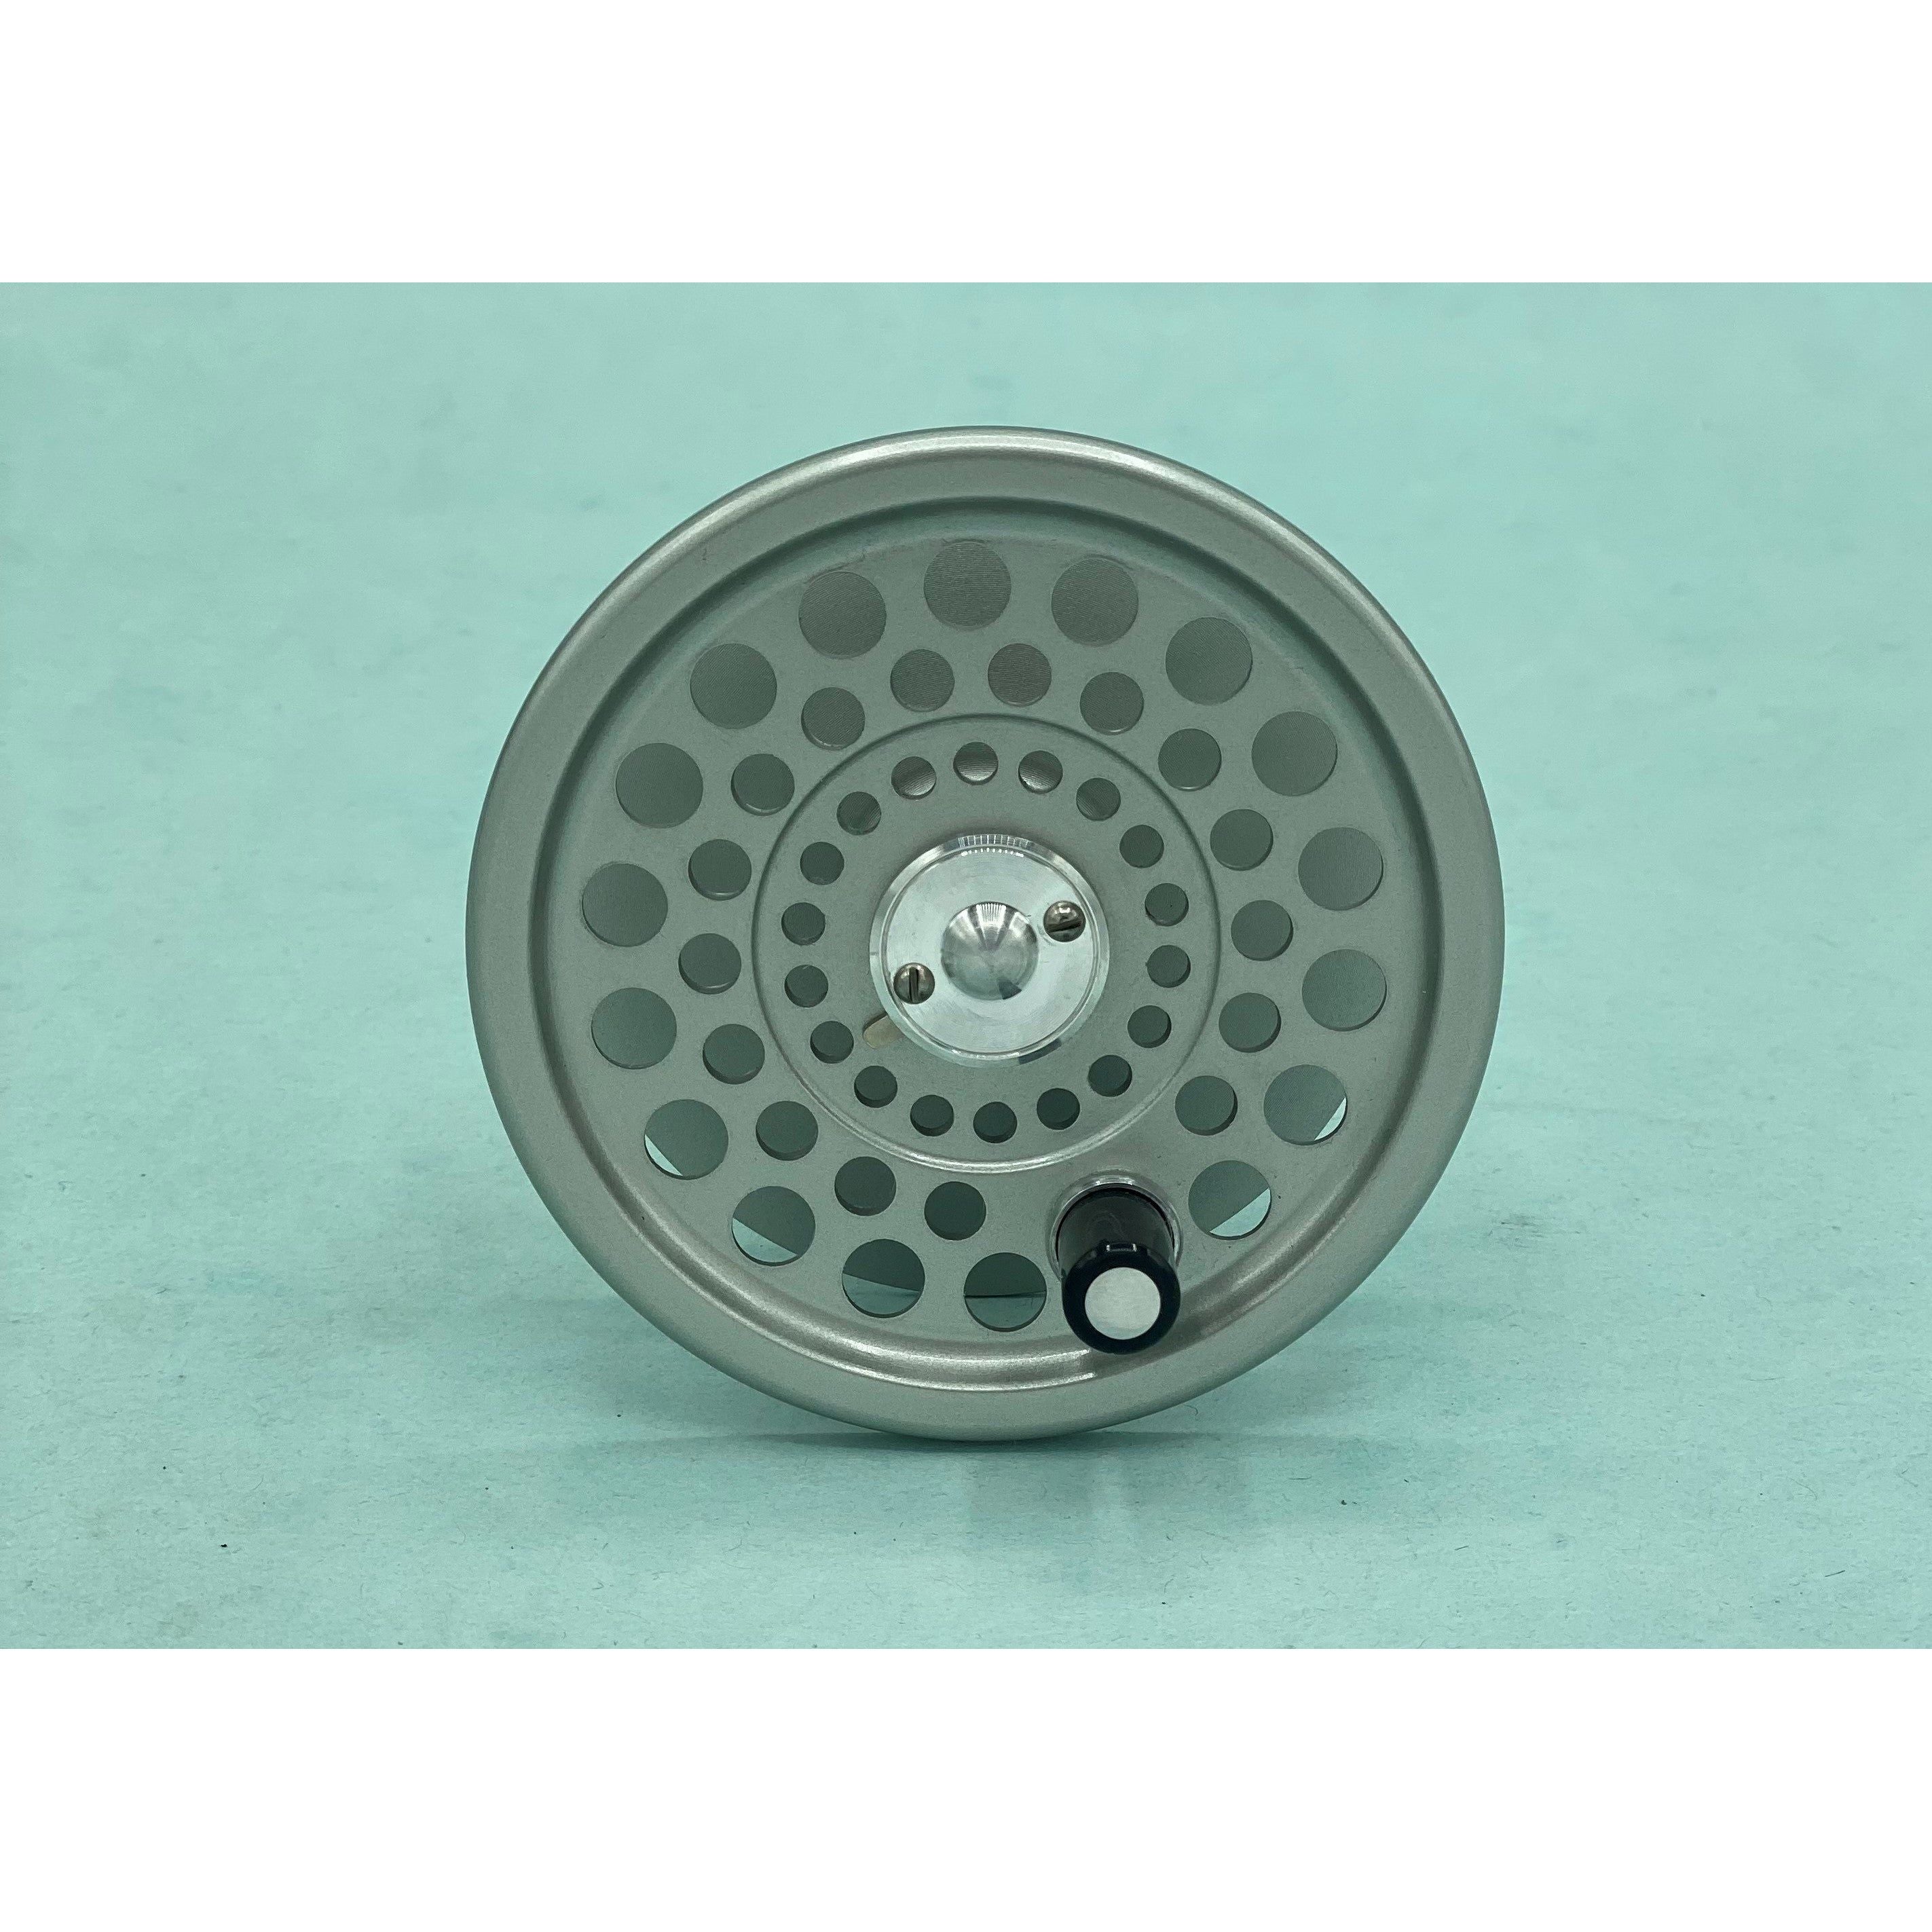 HARDY MARQUIS #5 fly reel USED